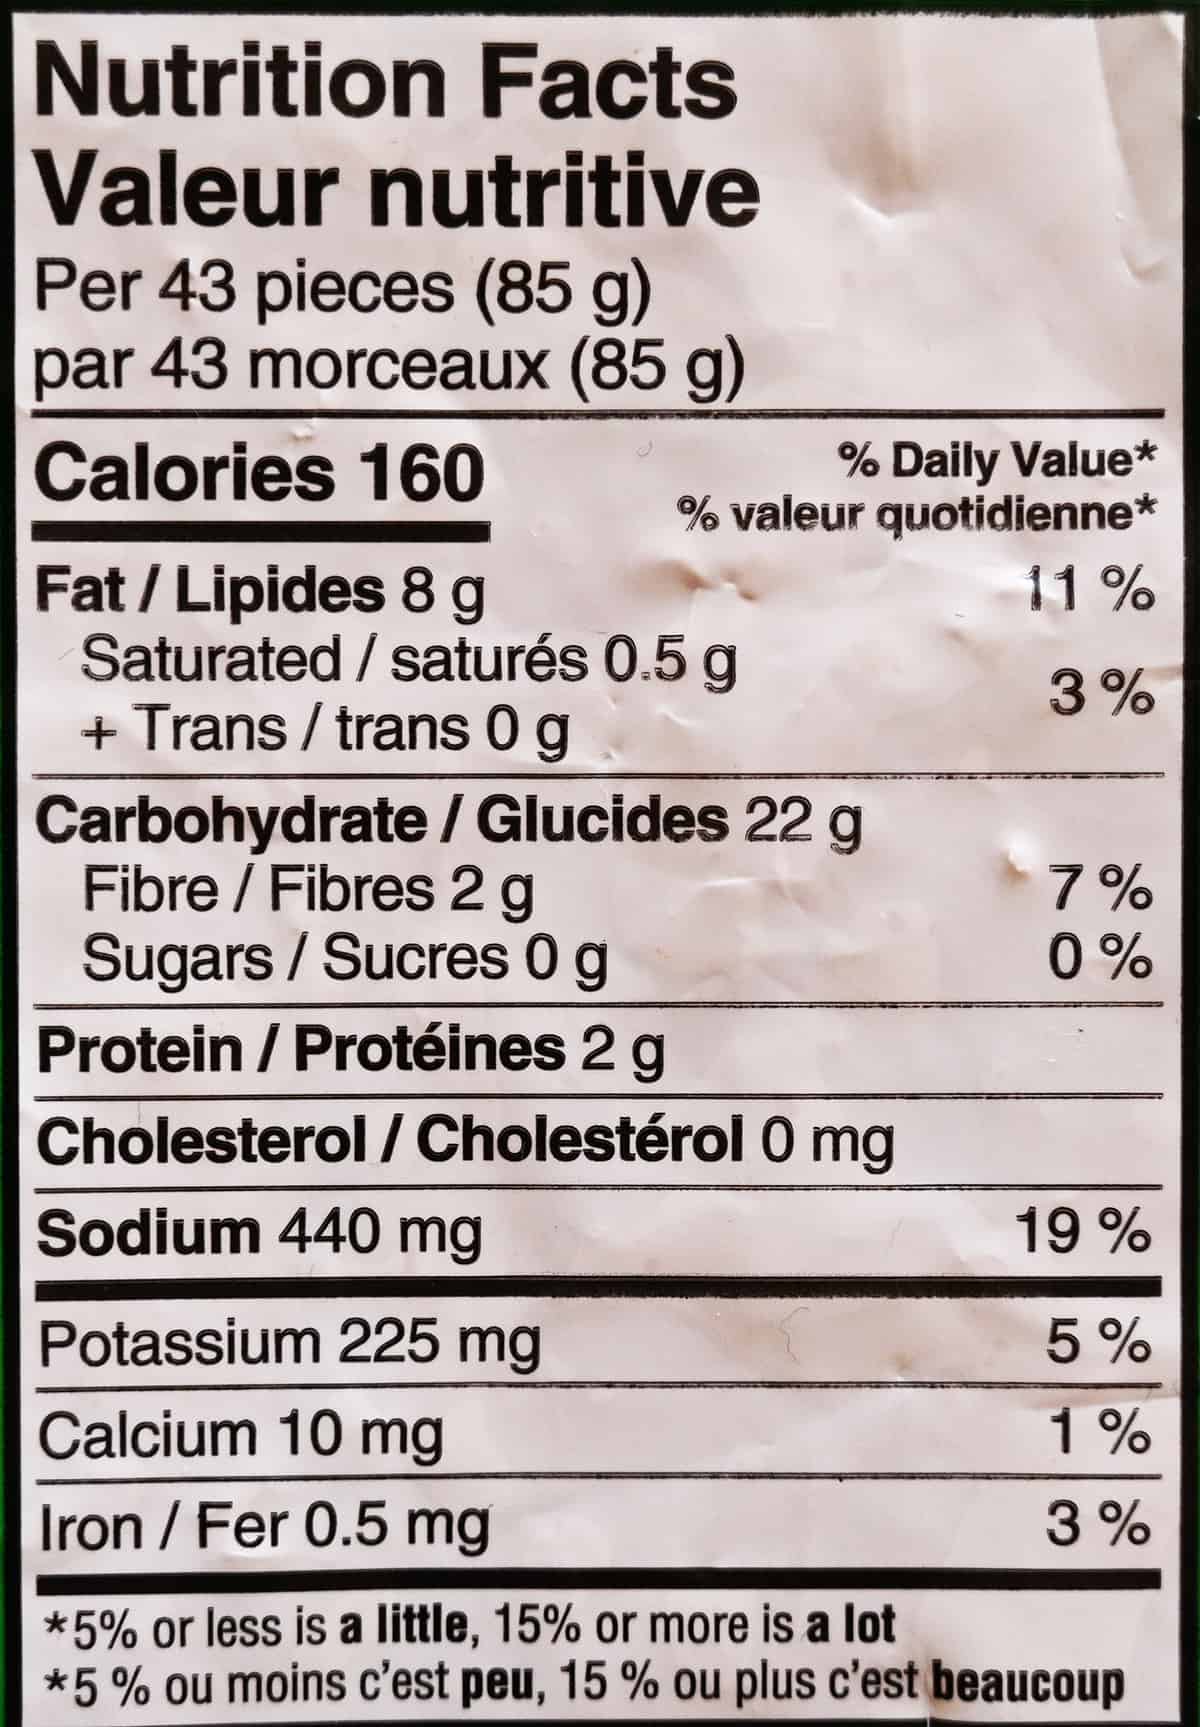 Image of the nutrition facts label for the fries from the bag.